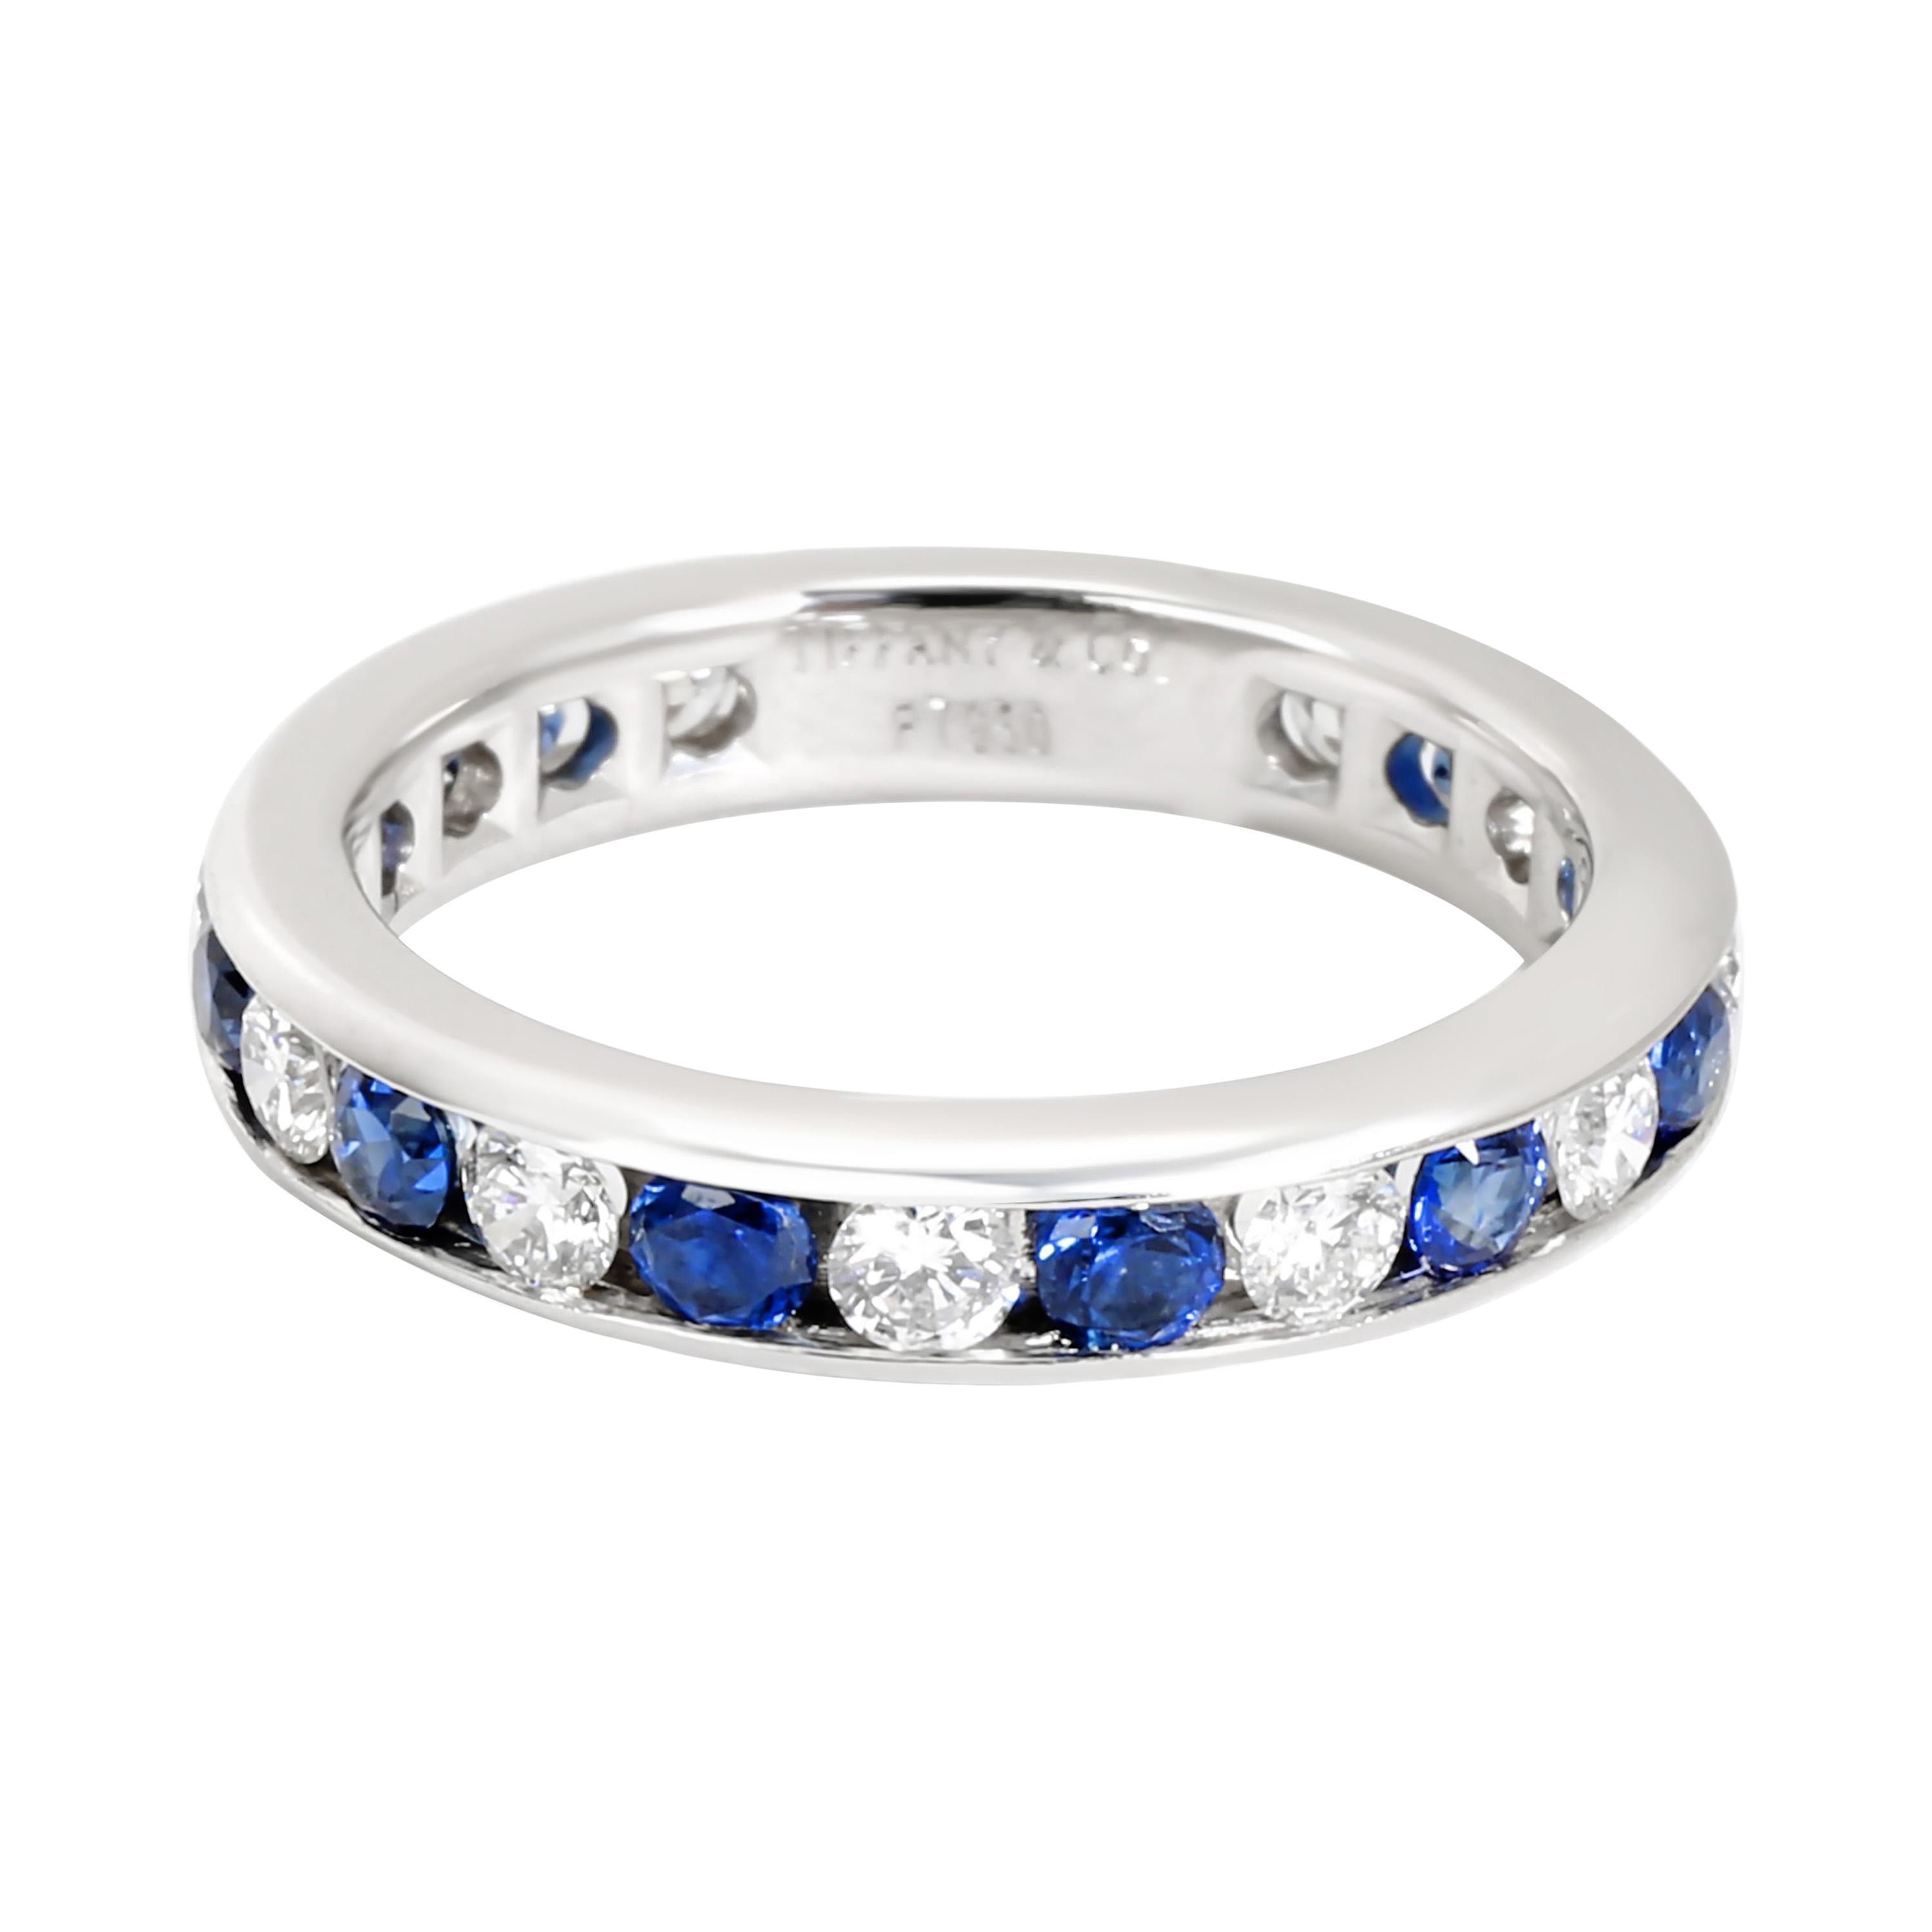 Tiffany & Co. Channel Set Diamond and Sapphire Band in Platinum 0.6 Carat